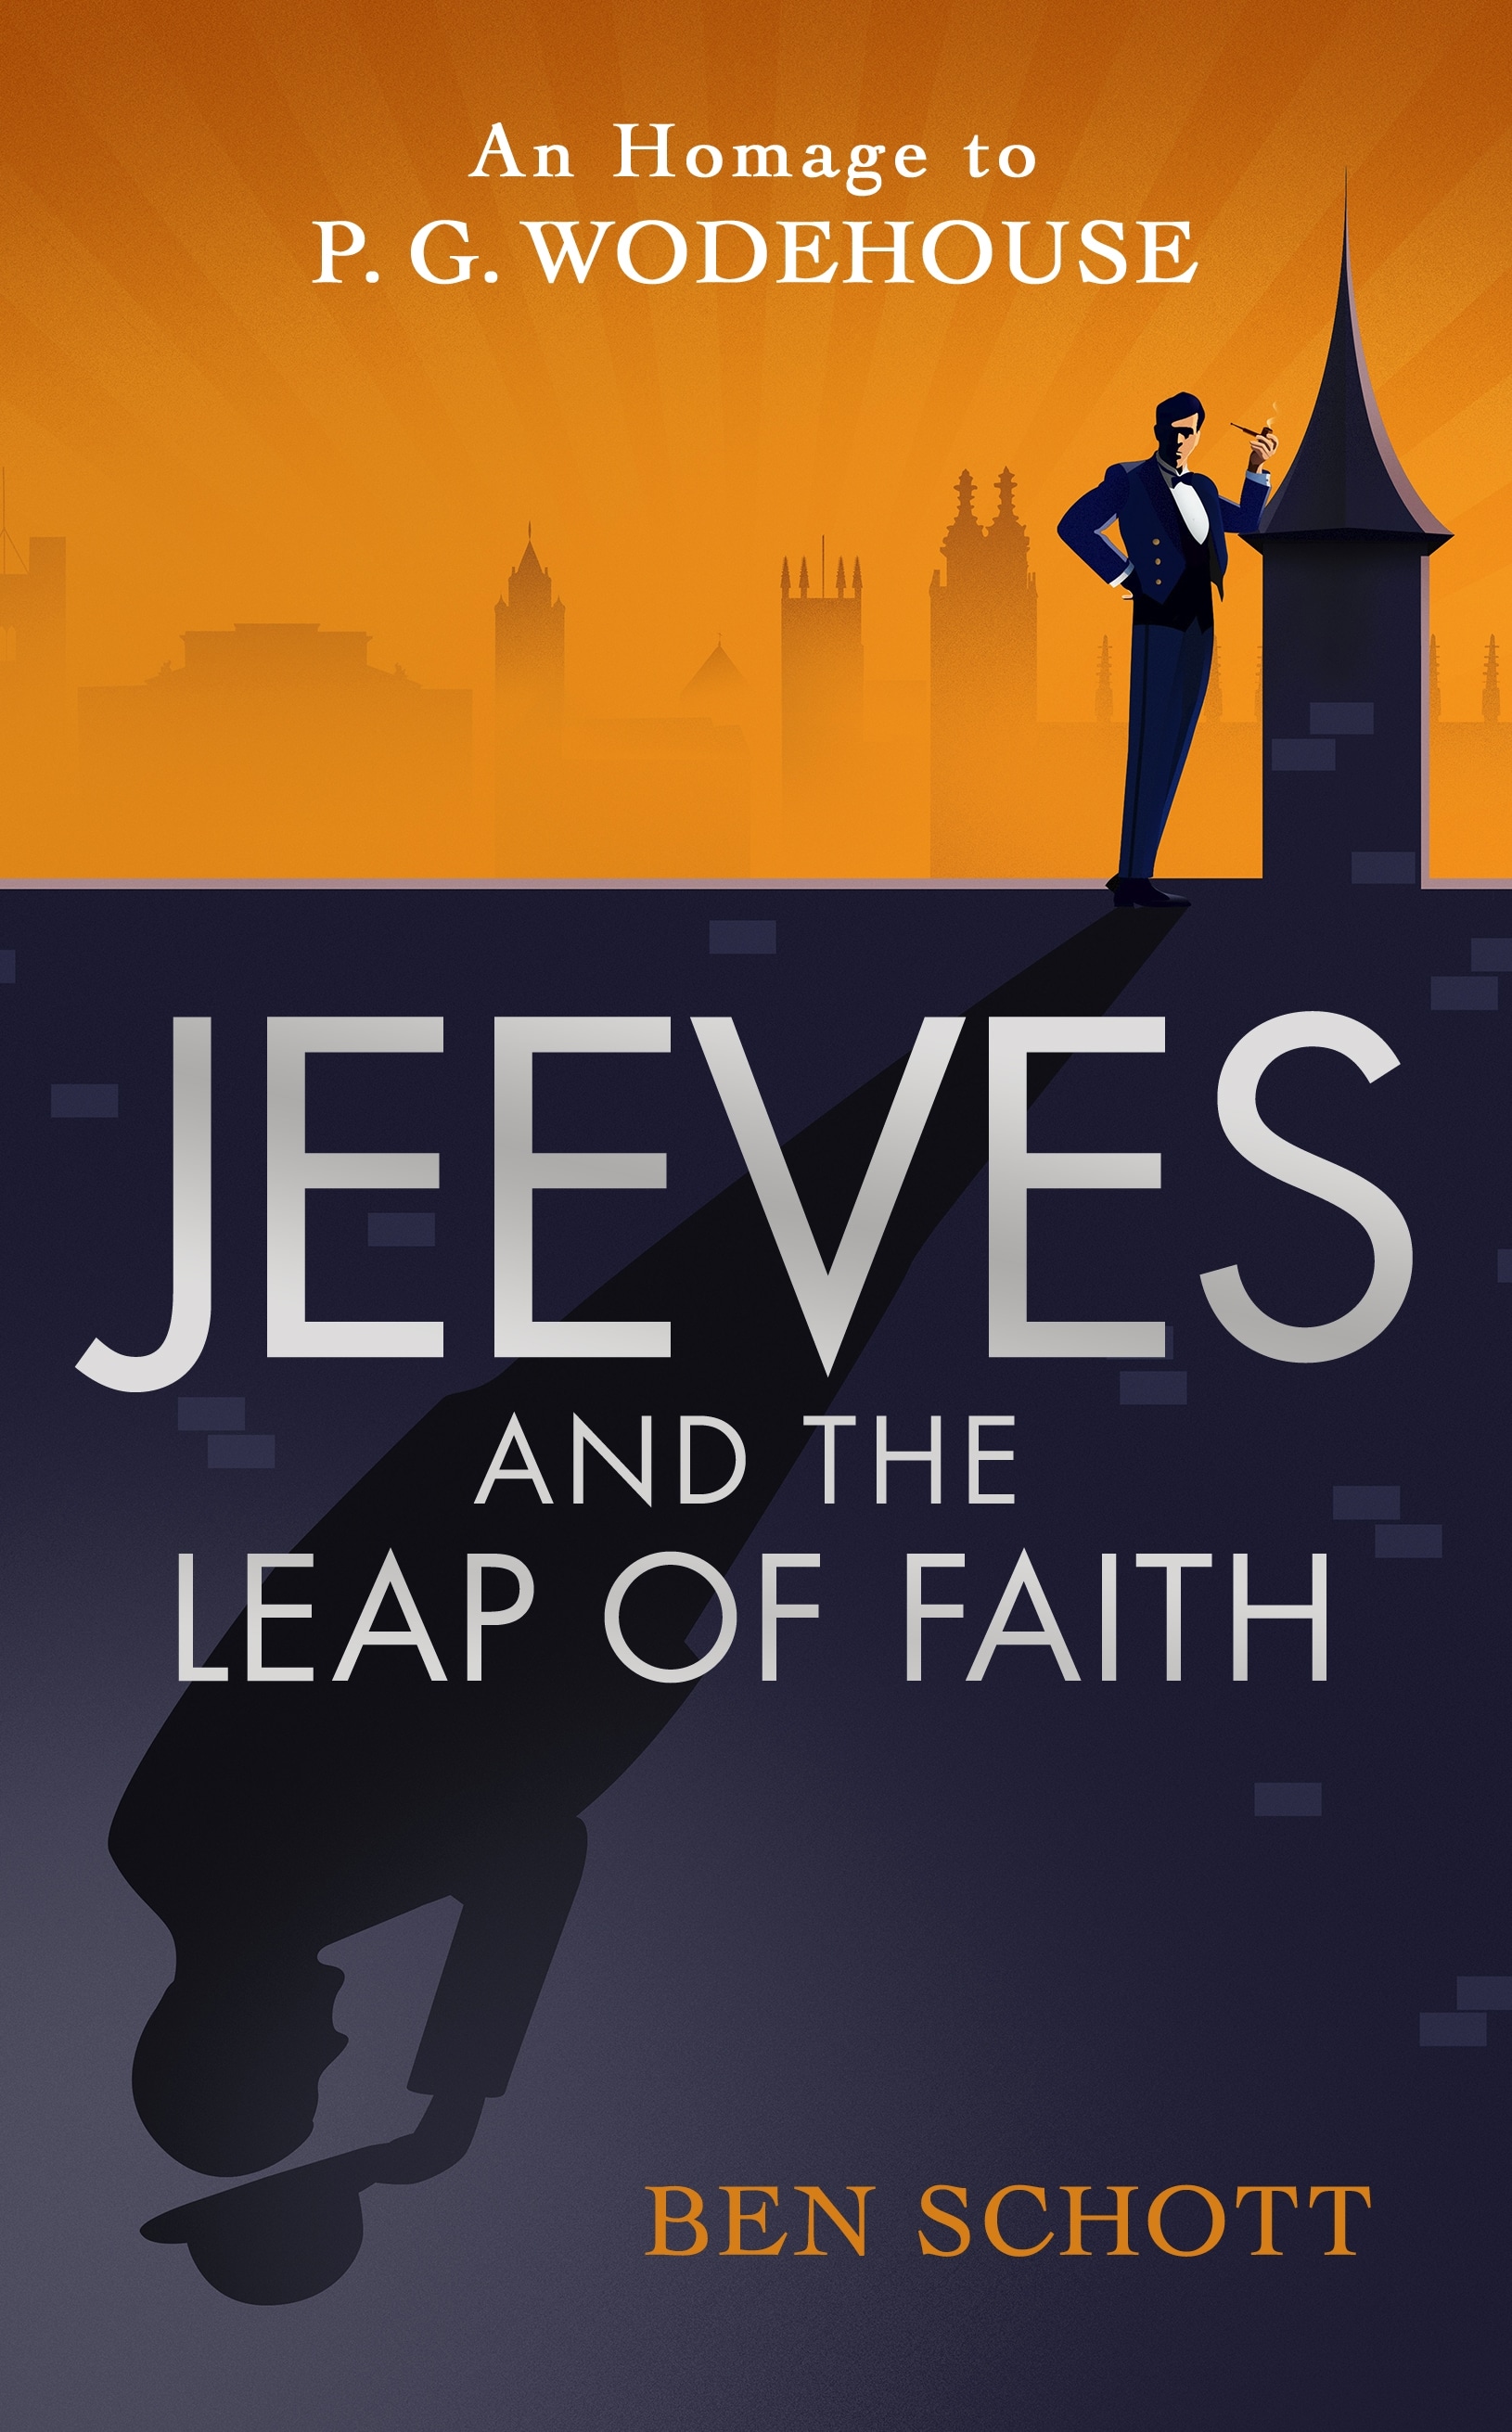 Book “Jeeves and the Leap of Faith” by Ben Schott — October 15, 2020